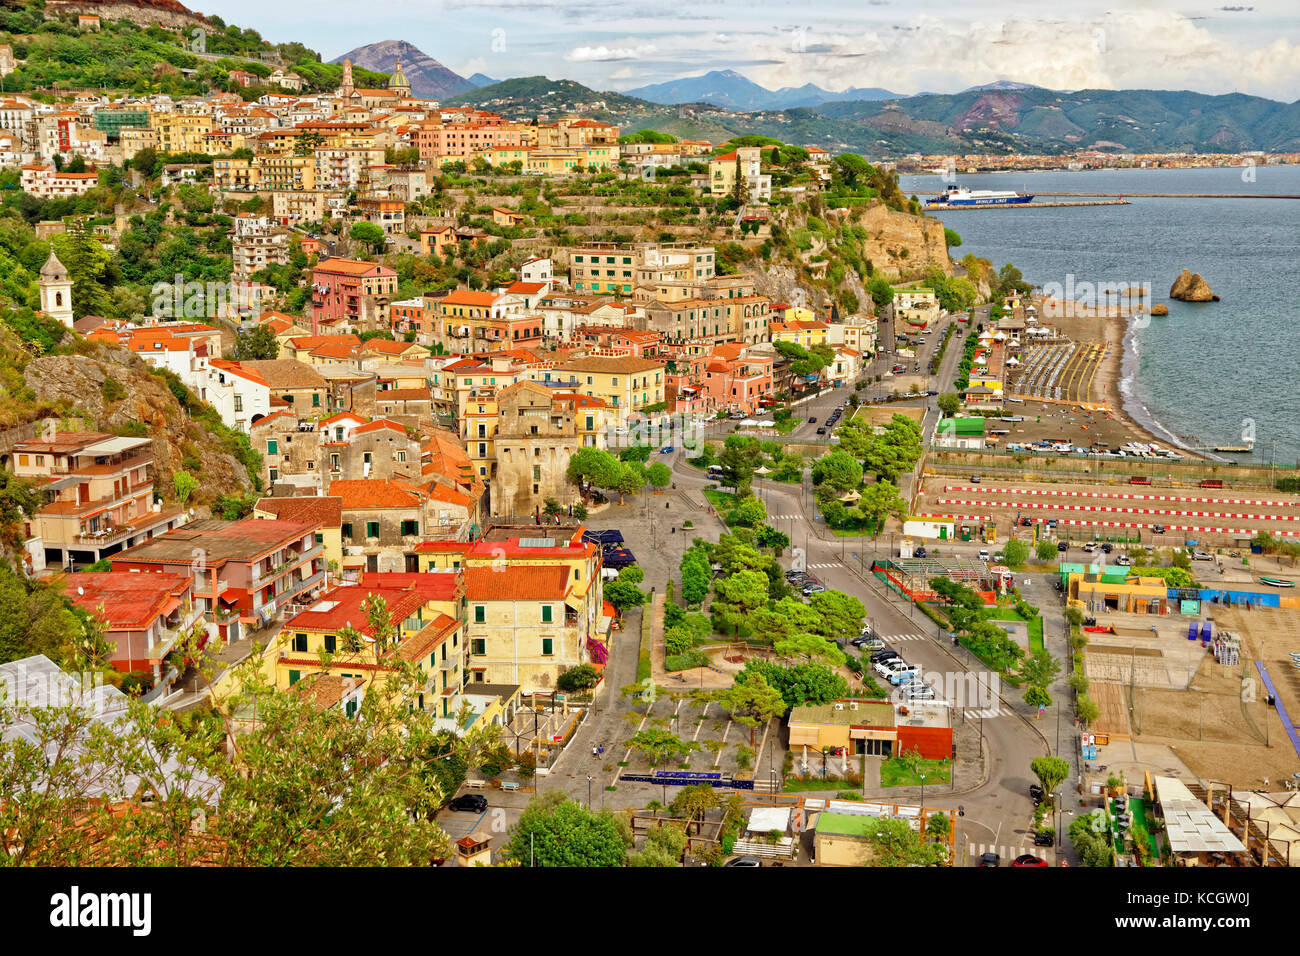 Vietri Sul Mare, Salerno, at the eastern end of the Amalfi Coast in southern Italy. Stock Photo